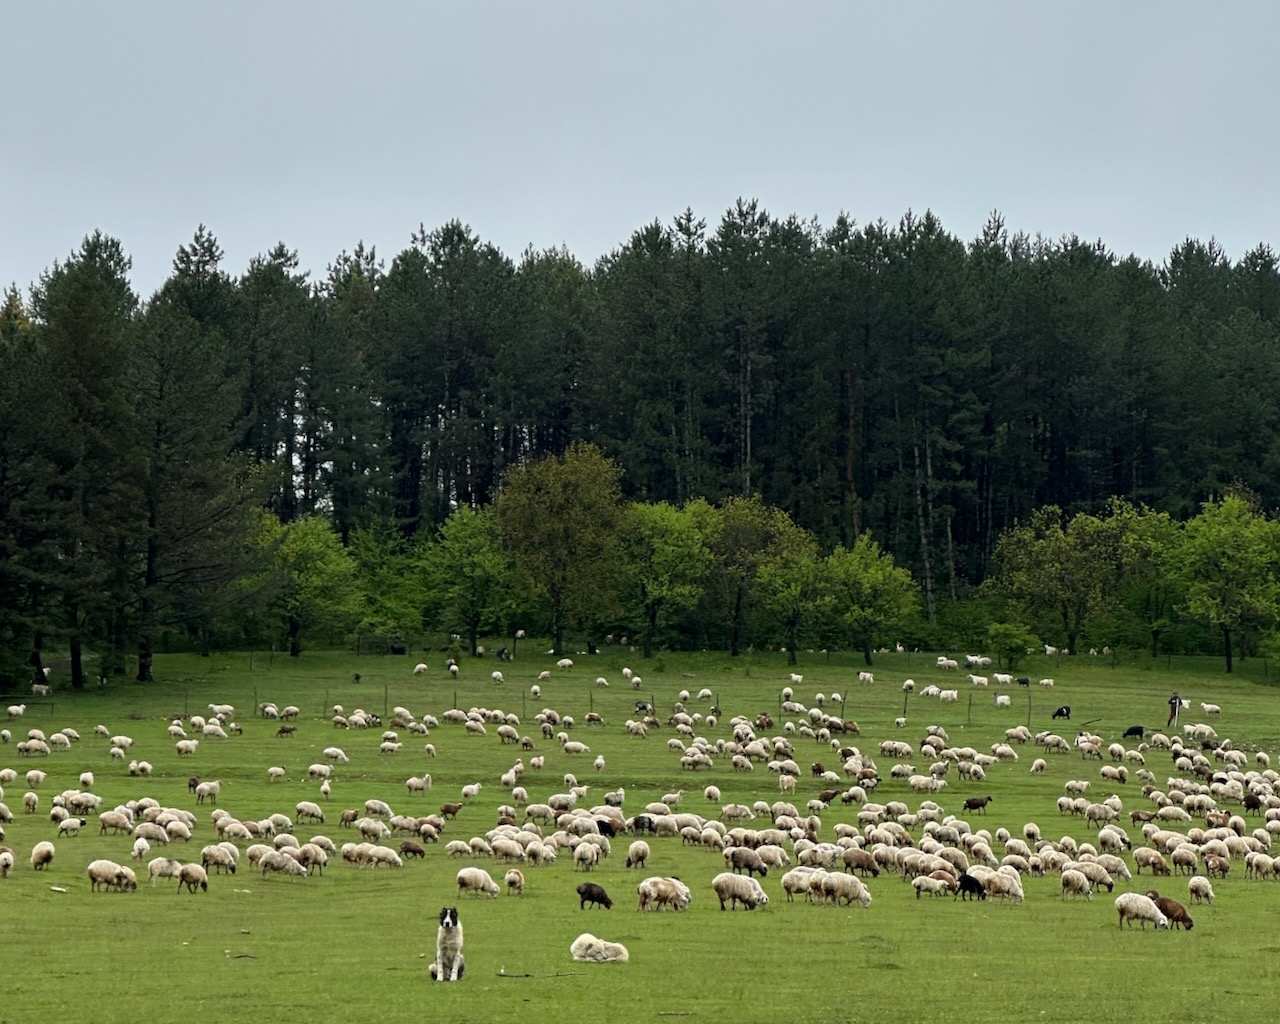 dogs watching over sheeps near a forest